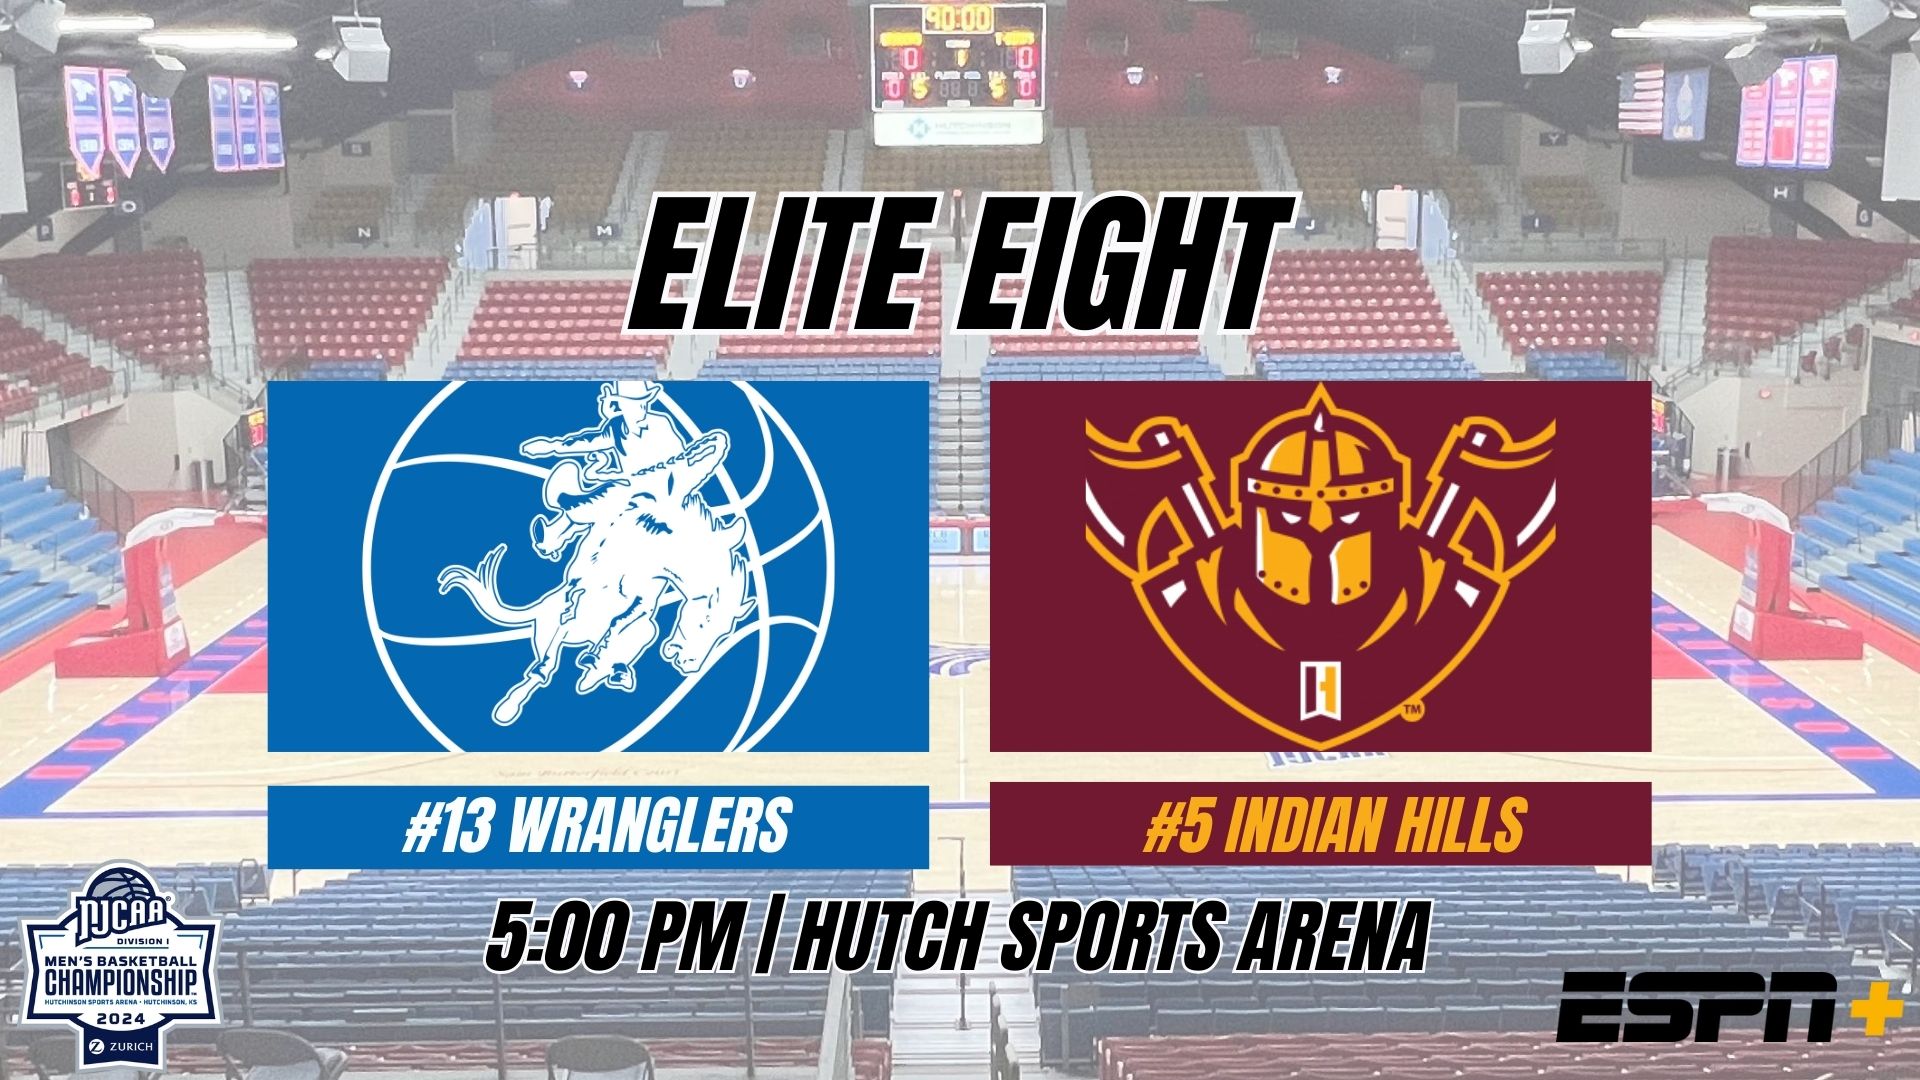 Men's Basketball face Indian Hills in the Elite Eight